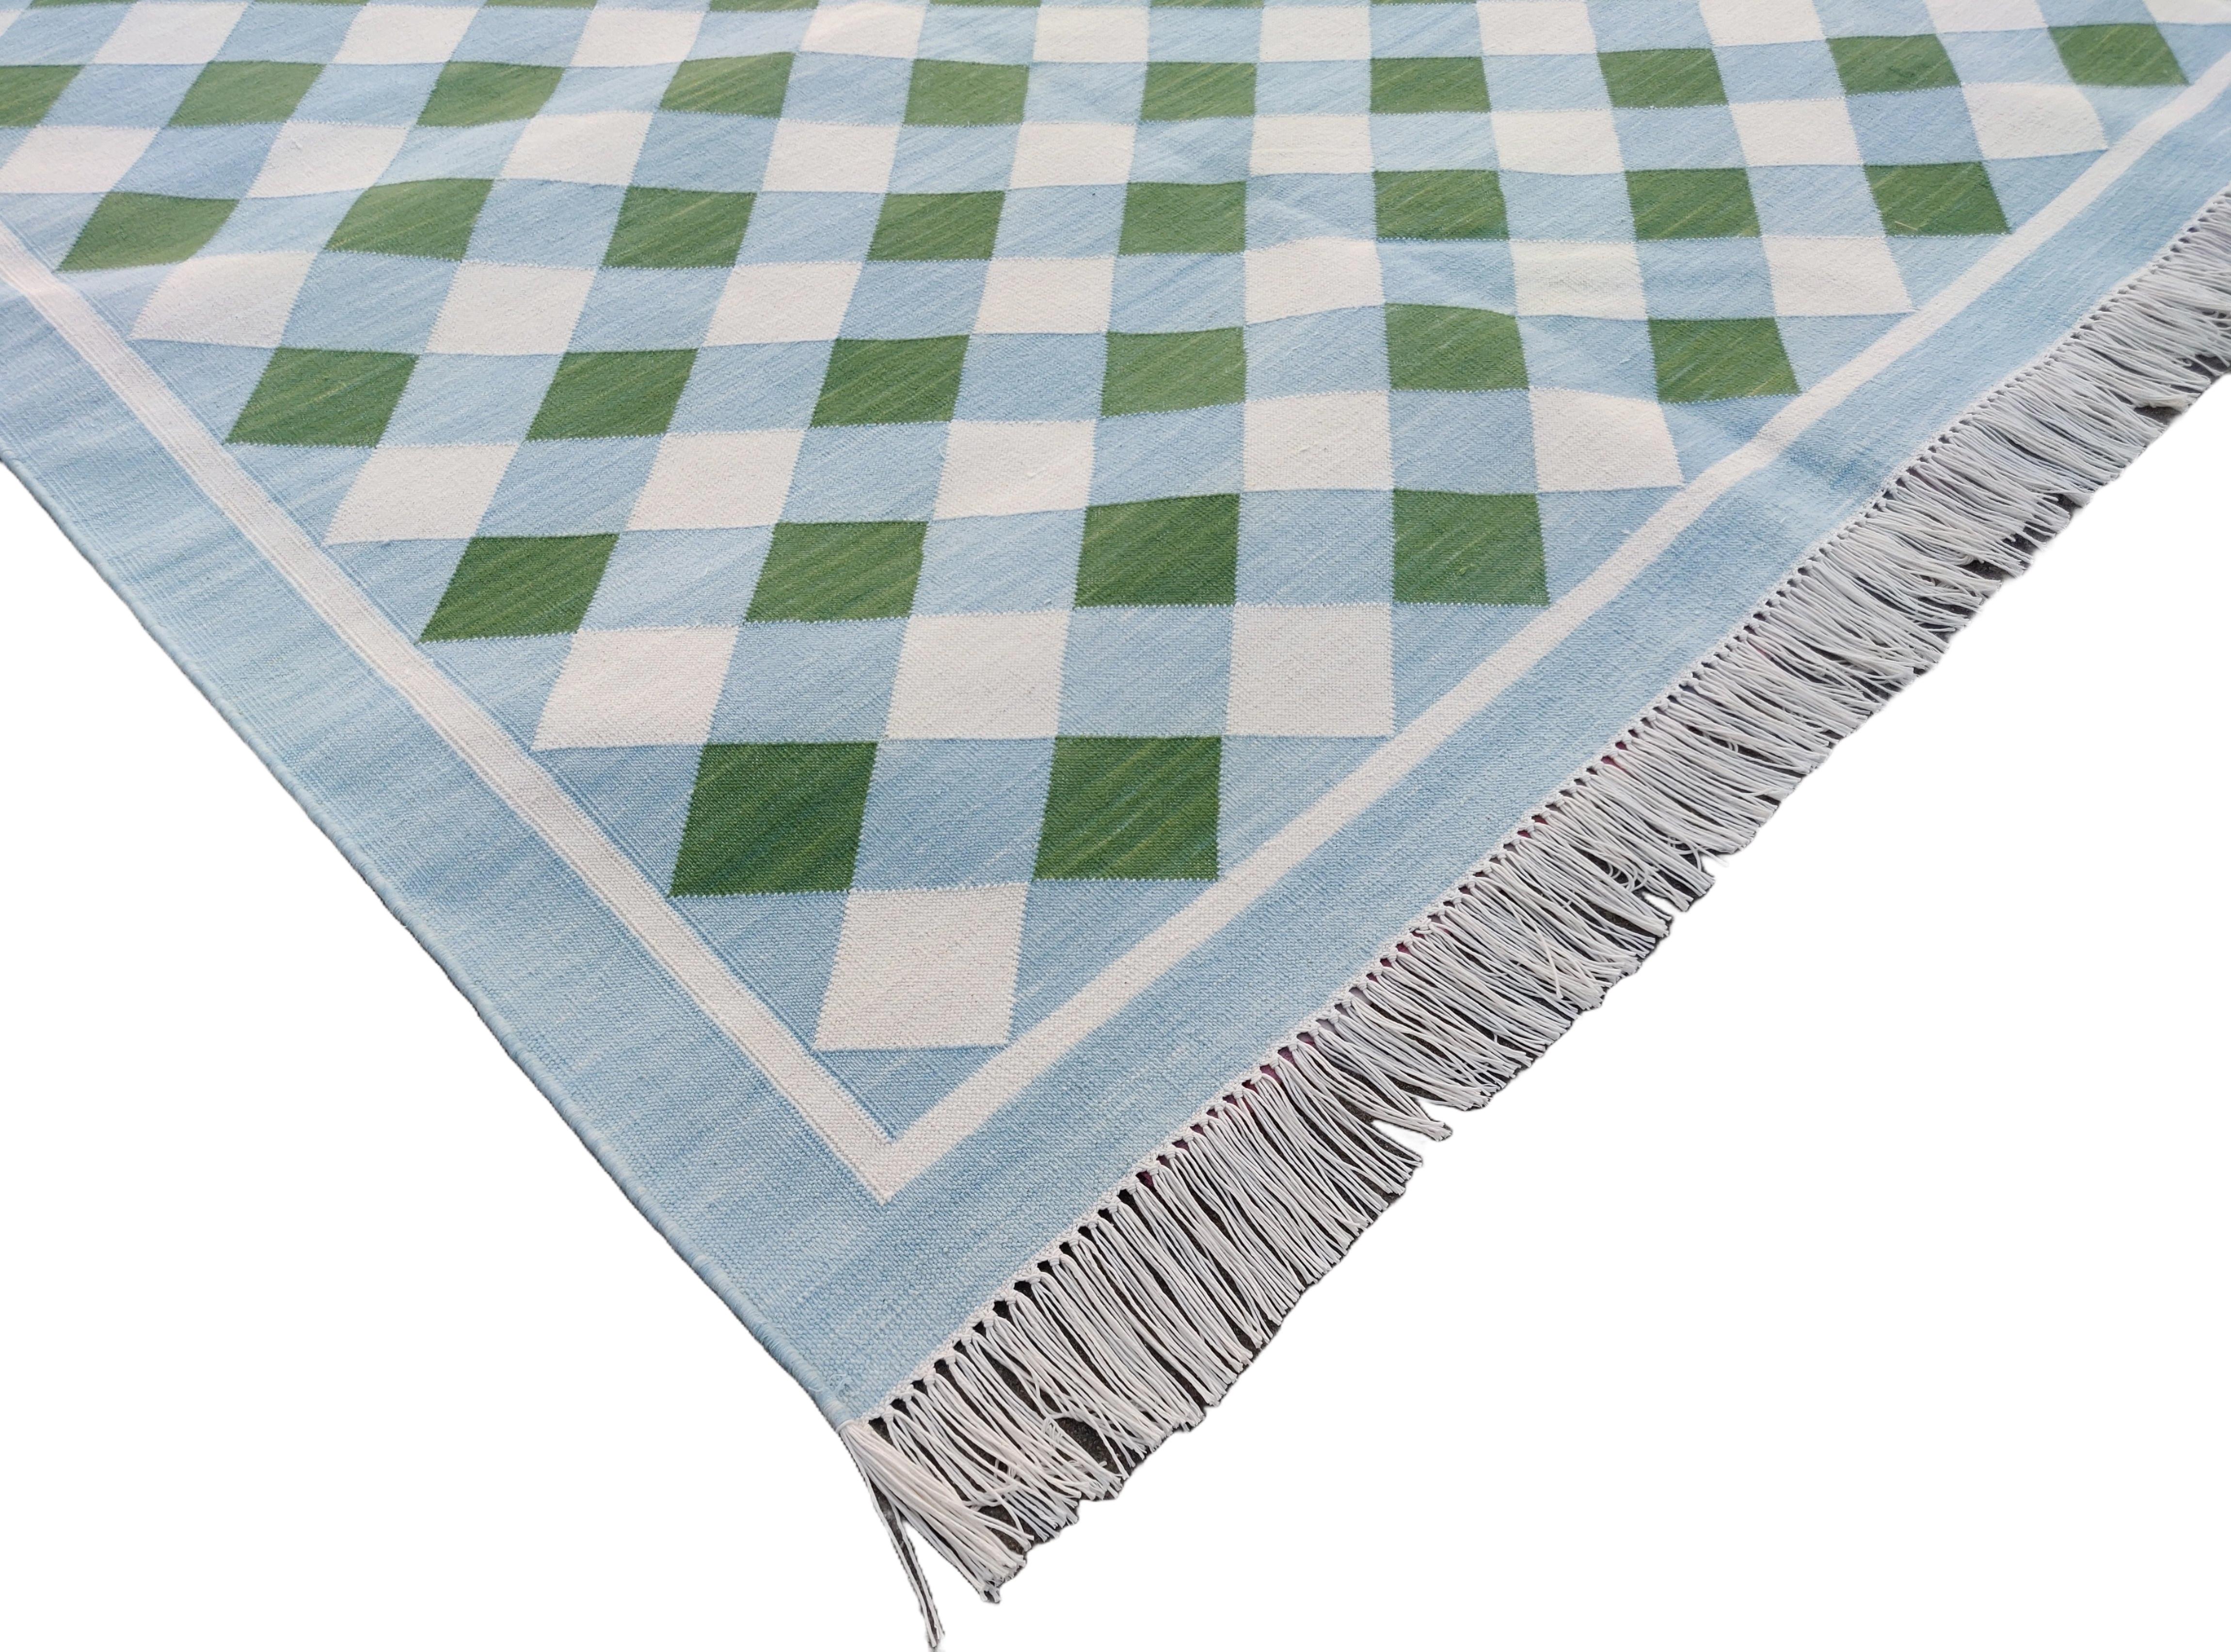 Cotton Vegetable Dyed Area Rug, Sky Blue, Cream And Green Checked Indian Rug-8'x10'
These special flat-weave dhurries are hand-woven with 15 ply 100% cotton yarn. Due to the special manufacturing techniques used to create our rugs, the size and